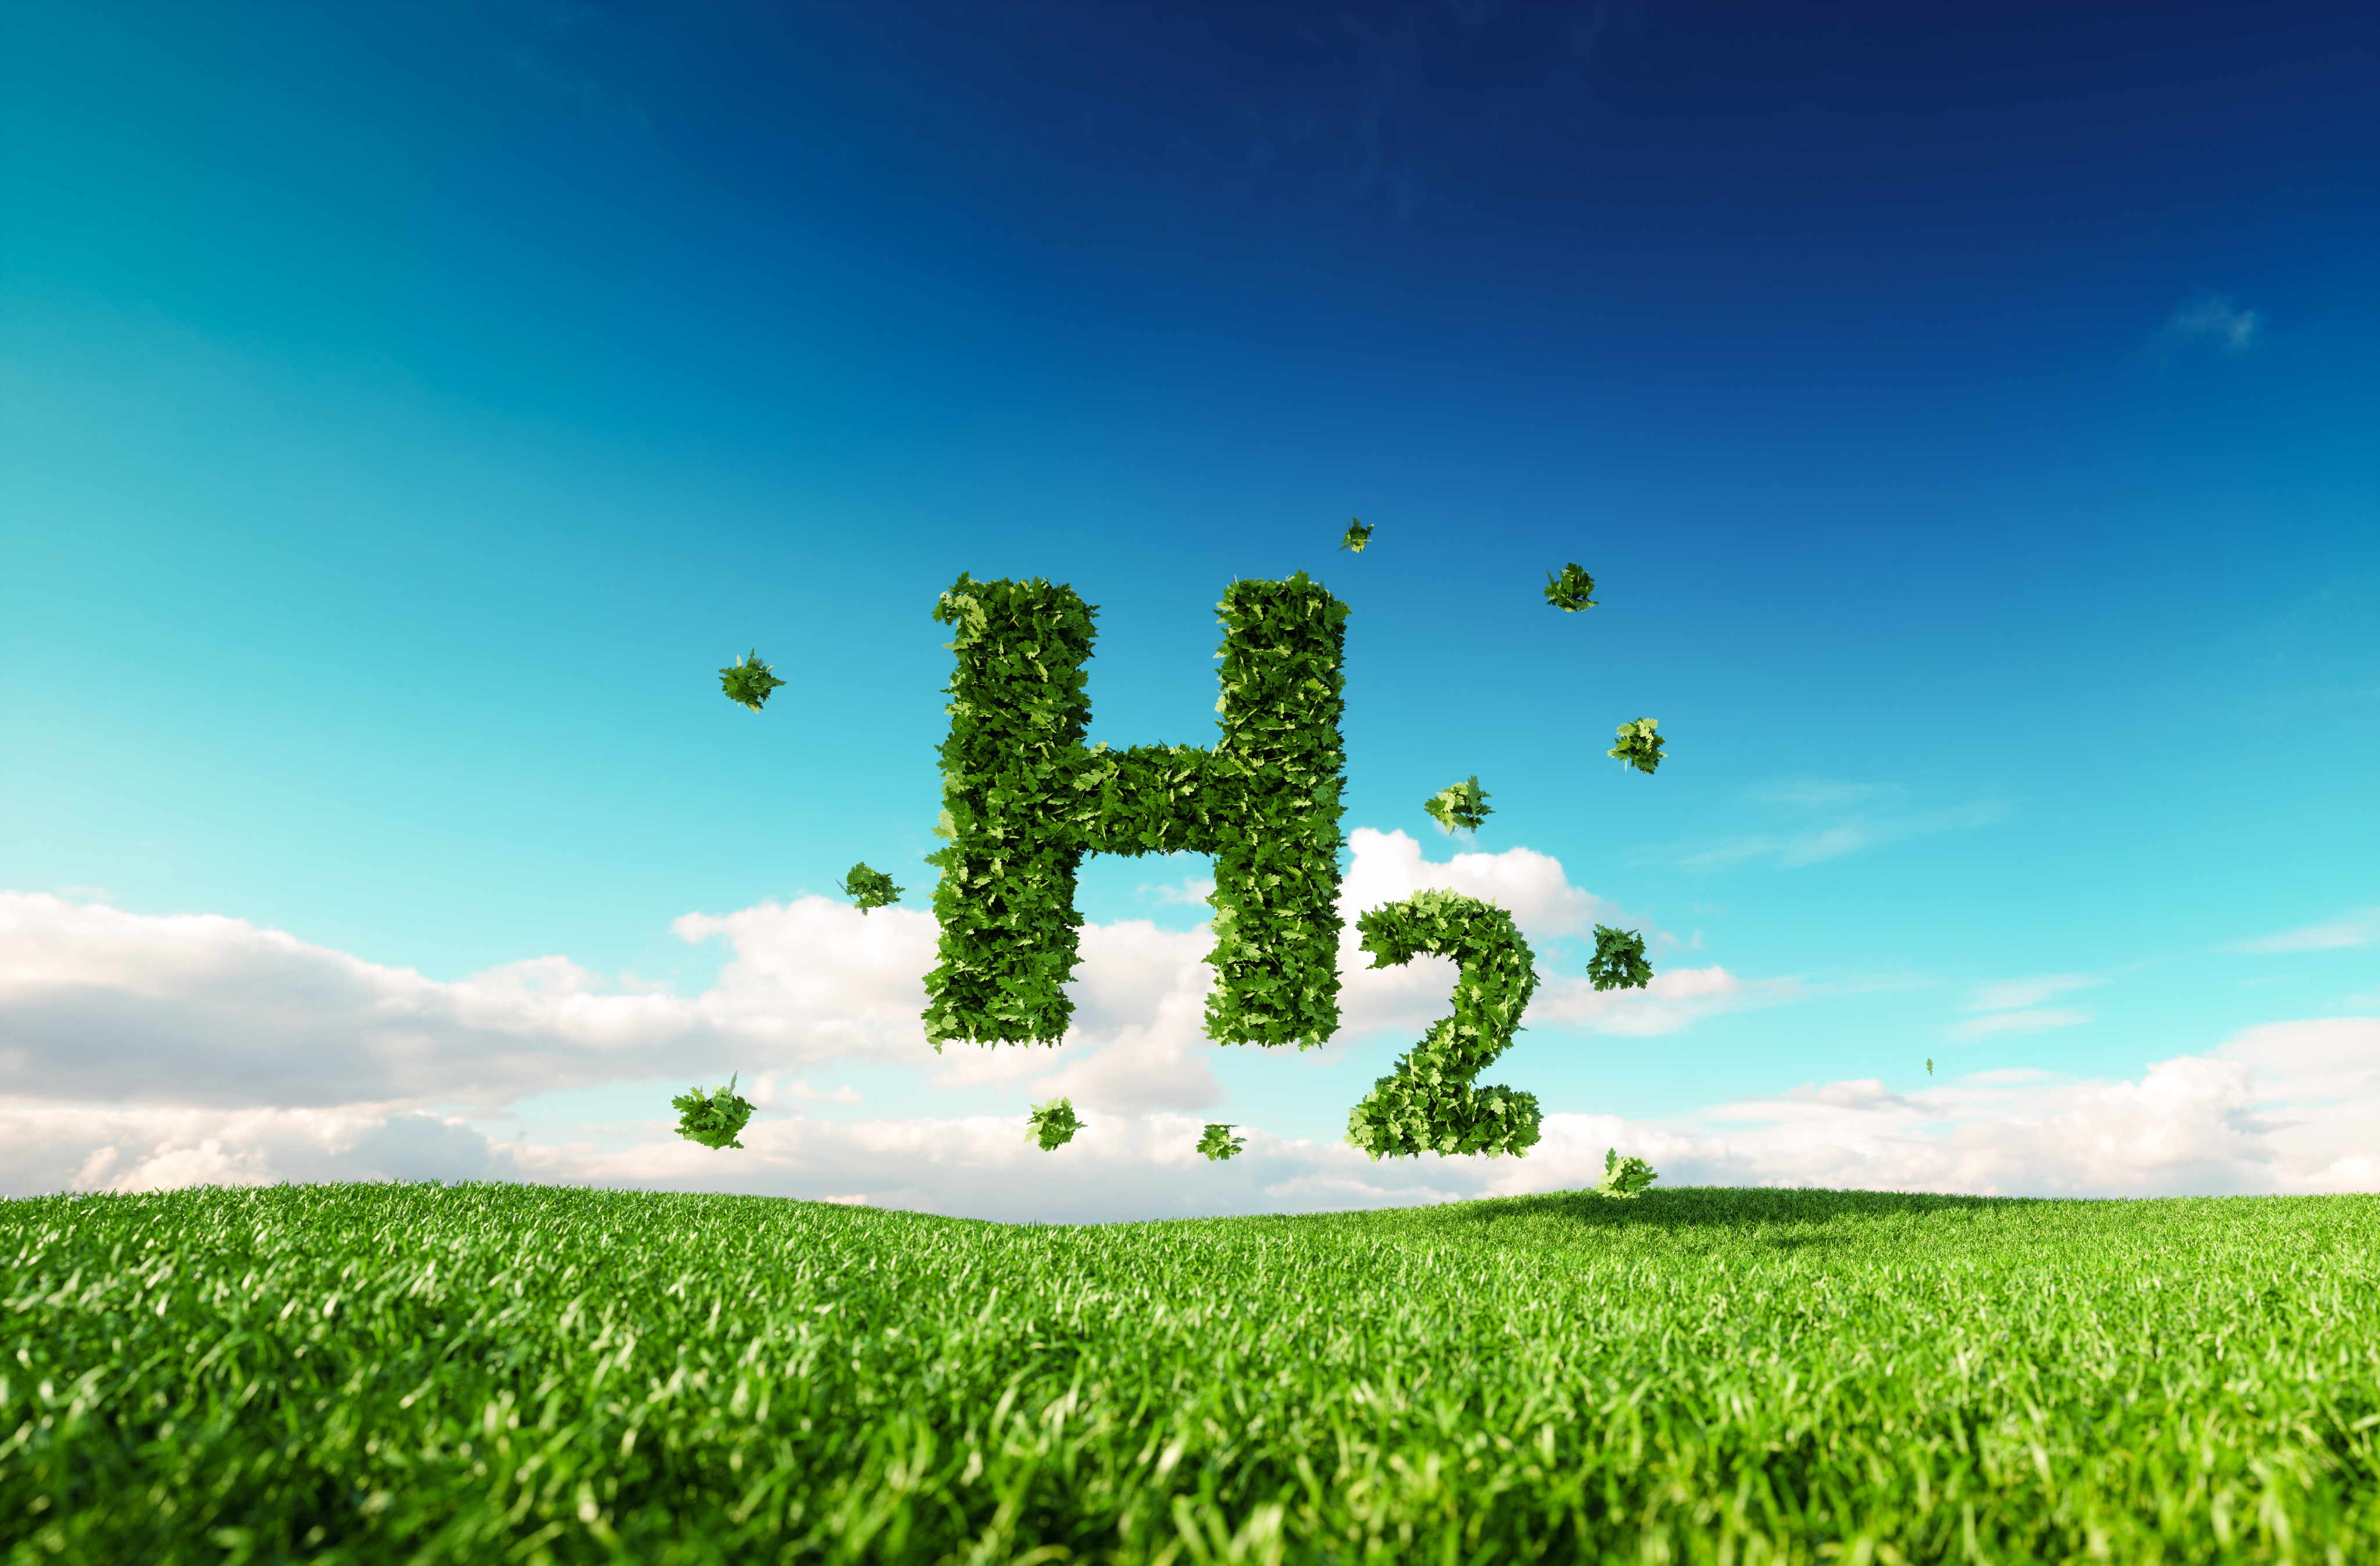 Eco friendly clean hydrogen energy concept. 3d rendering of hydrogen icon on fresh spring meadow with blue sky in background. Photo: Shutterstock
Royalty-free stock illustration ID: 1092687374